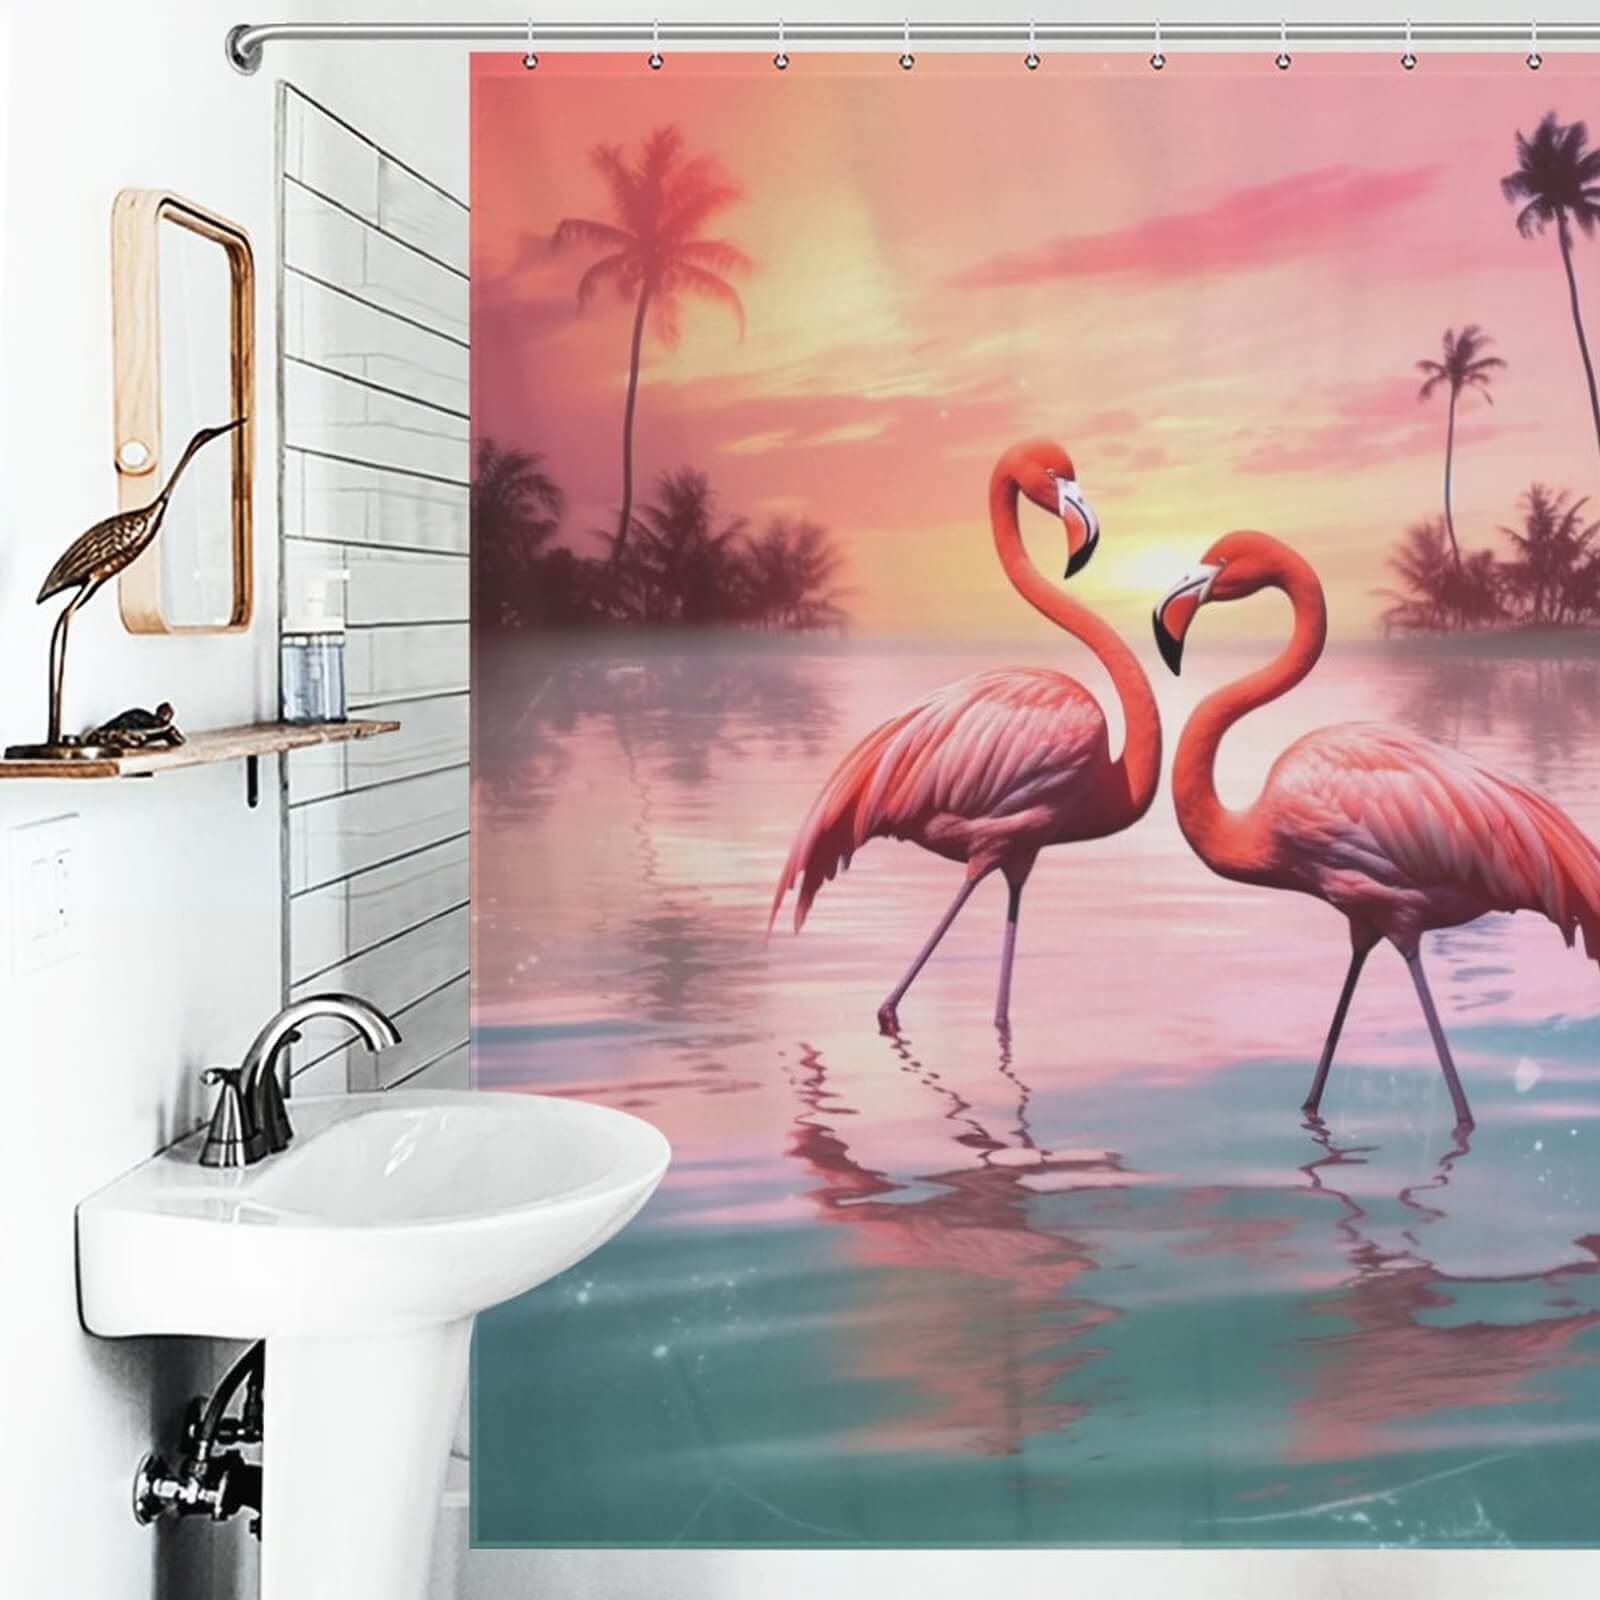 Transform your bathroom into a tropical paradise with the Ocean Beach Flamingo Shower Curtain from Cotton Cat.